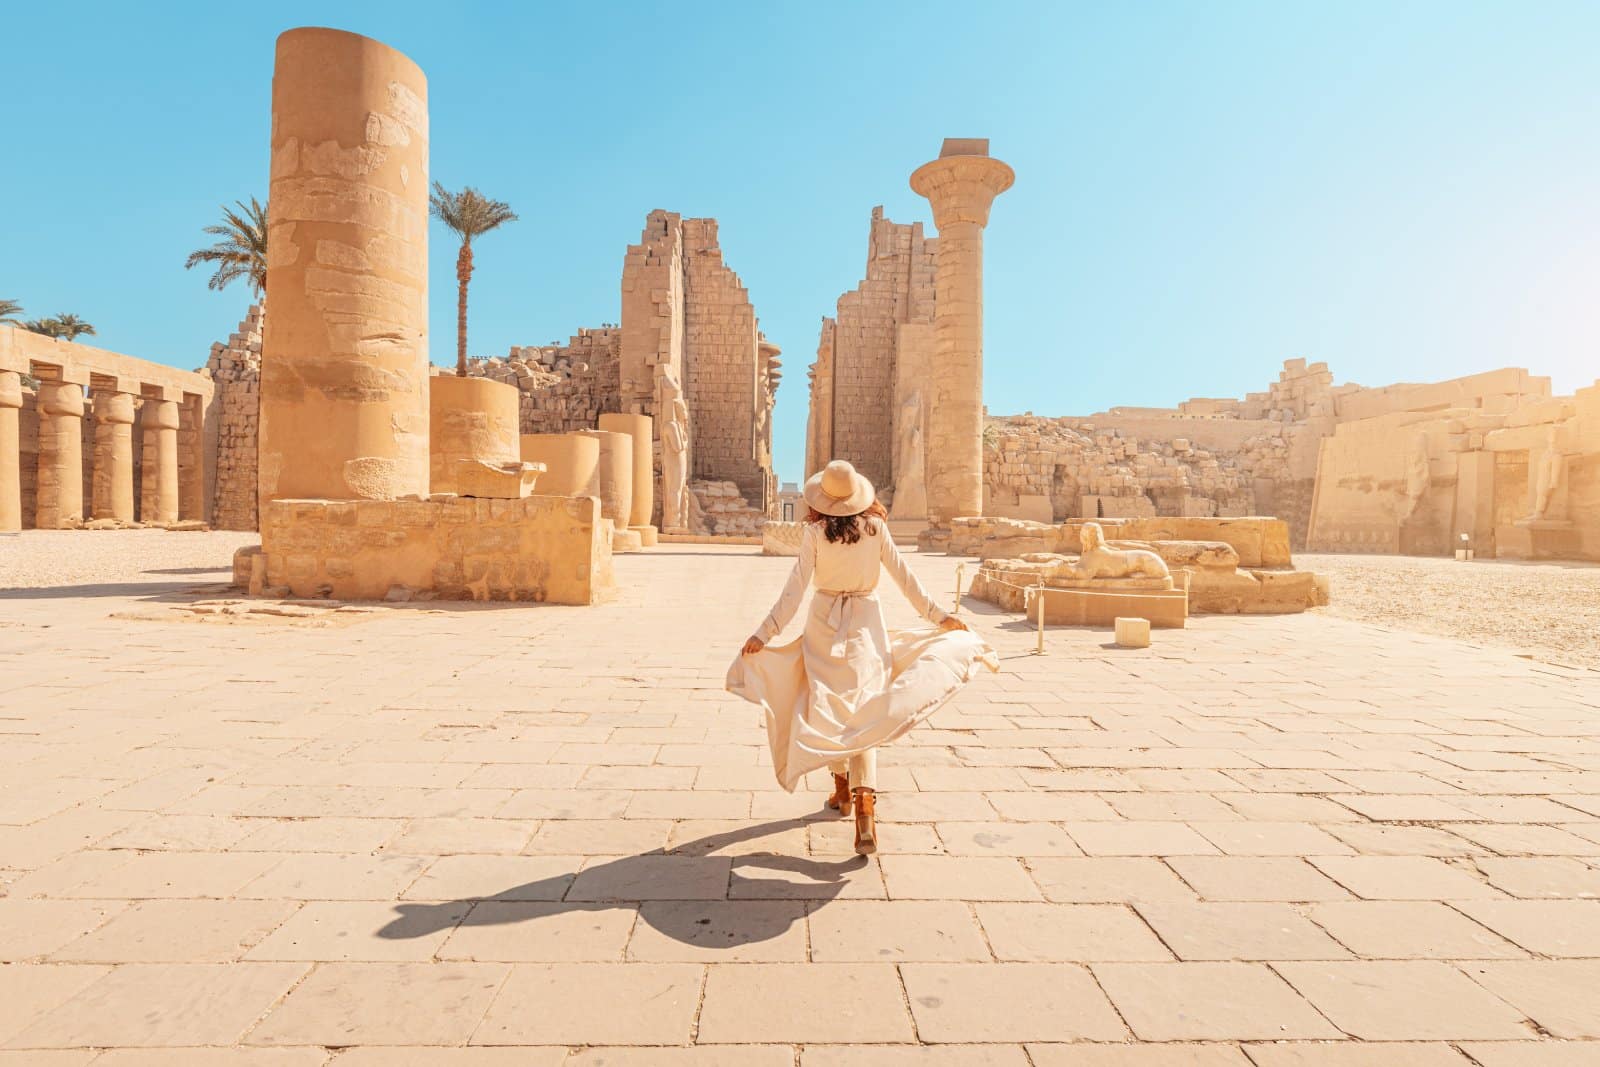 Image Credit: Shutterstock / frantic00 <p>These 20 destinations offer more than just a break from the usual—they provide a way to travel that aligns with your values of prudence, simplicity, and authenticity. Remember, the best journeys offer reflection and connection, not just souvenirs. Choose wisely, travel slowly, and enjoy discovering places where your anxiety and budget can both take a backseat.</p>